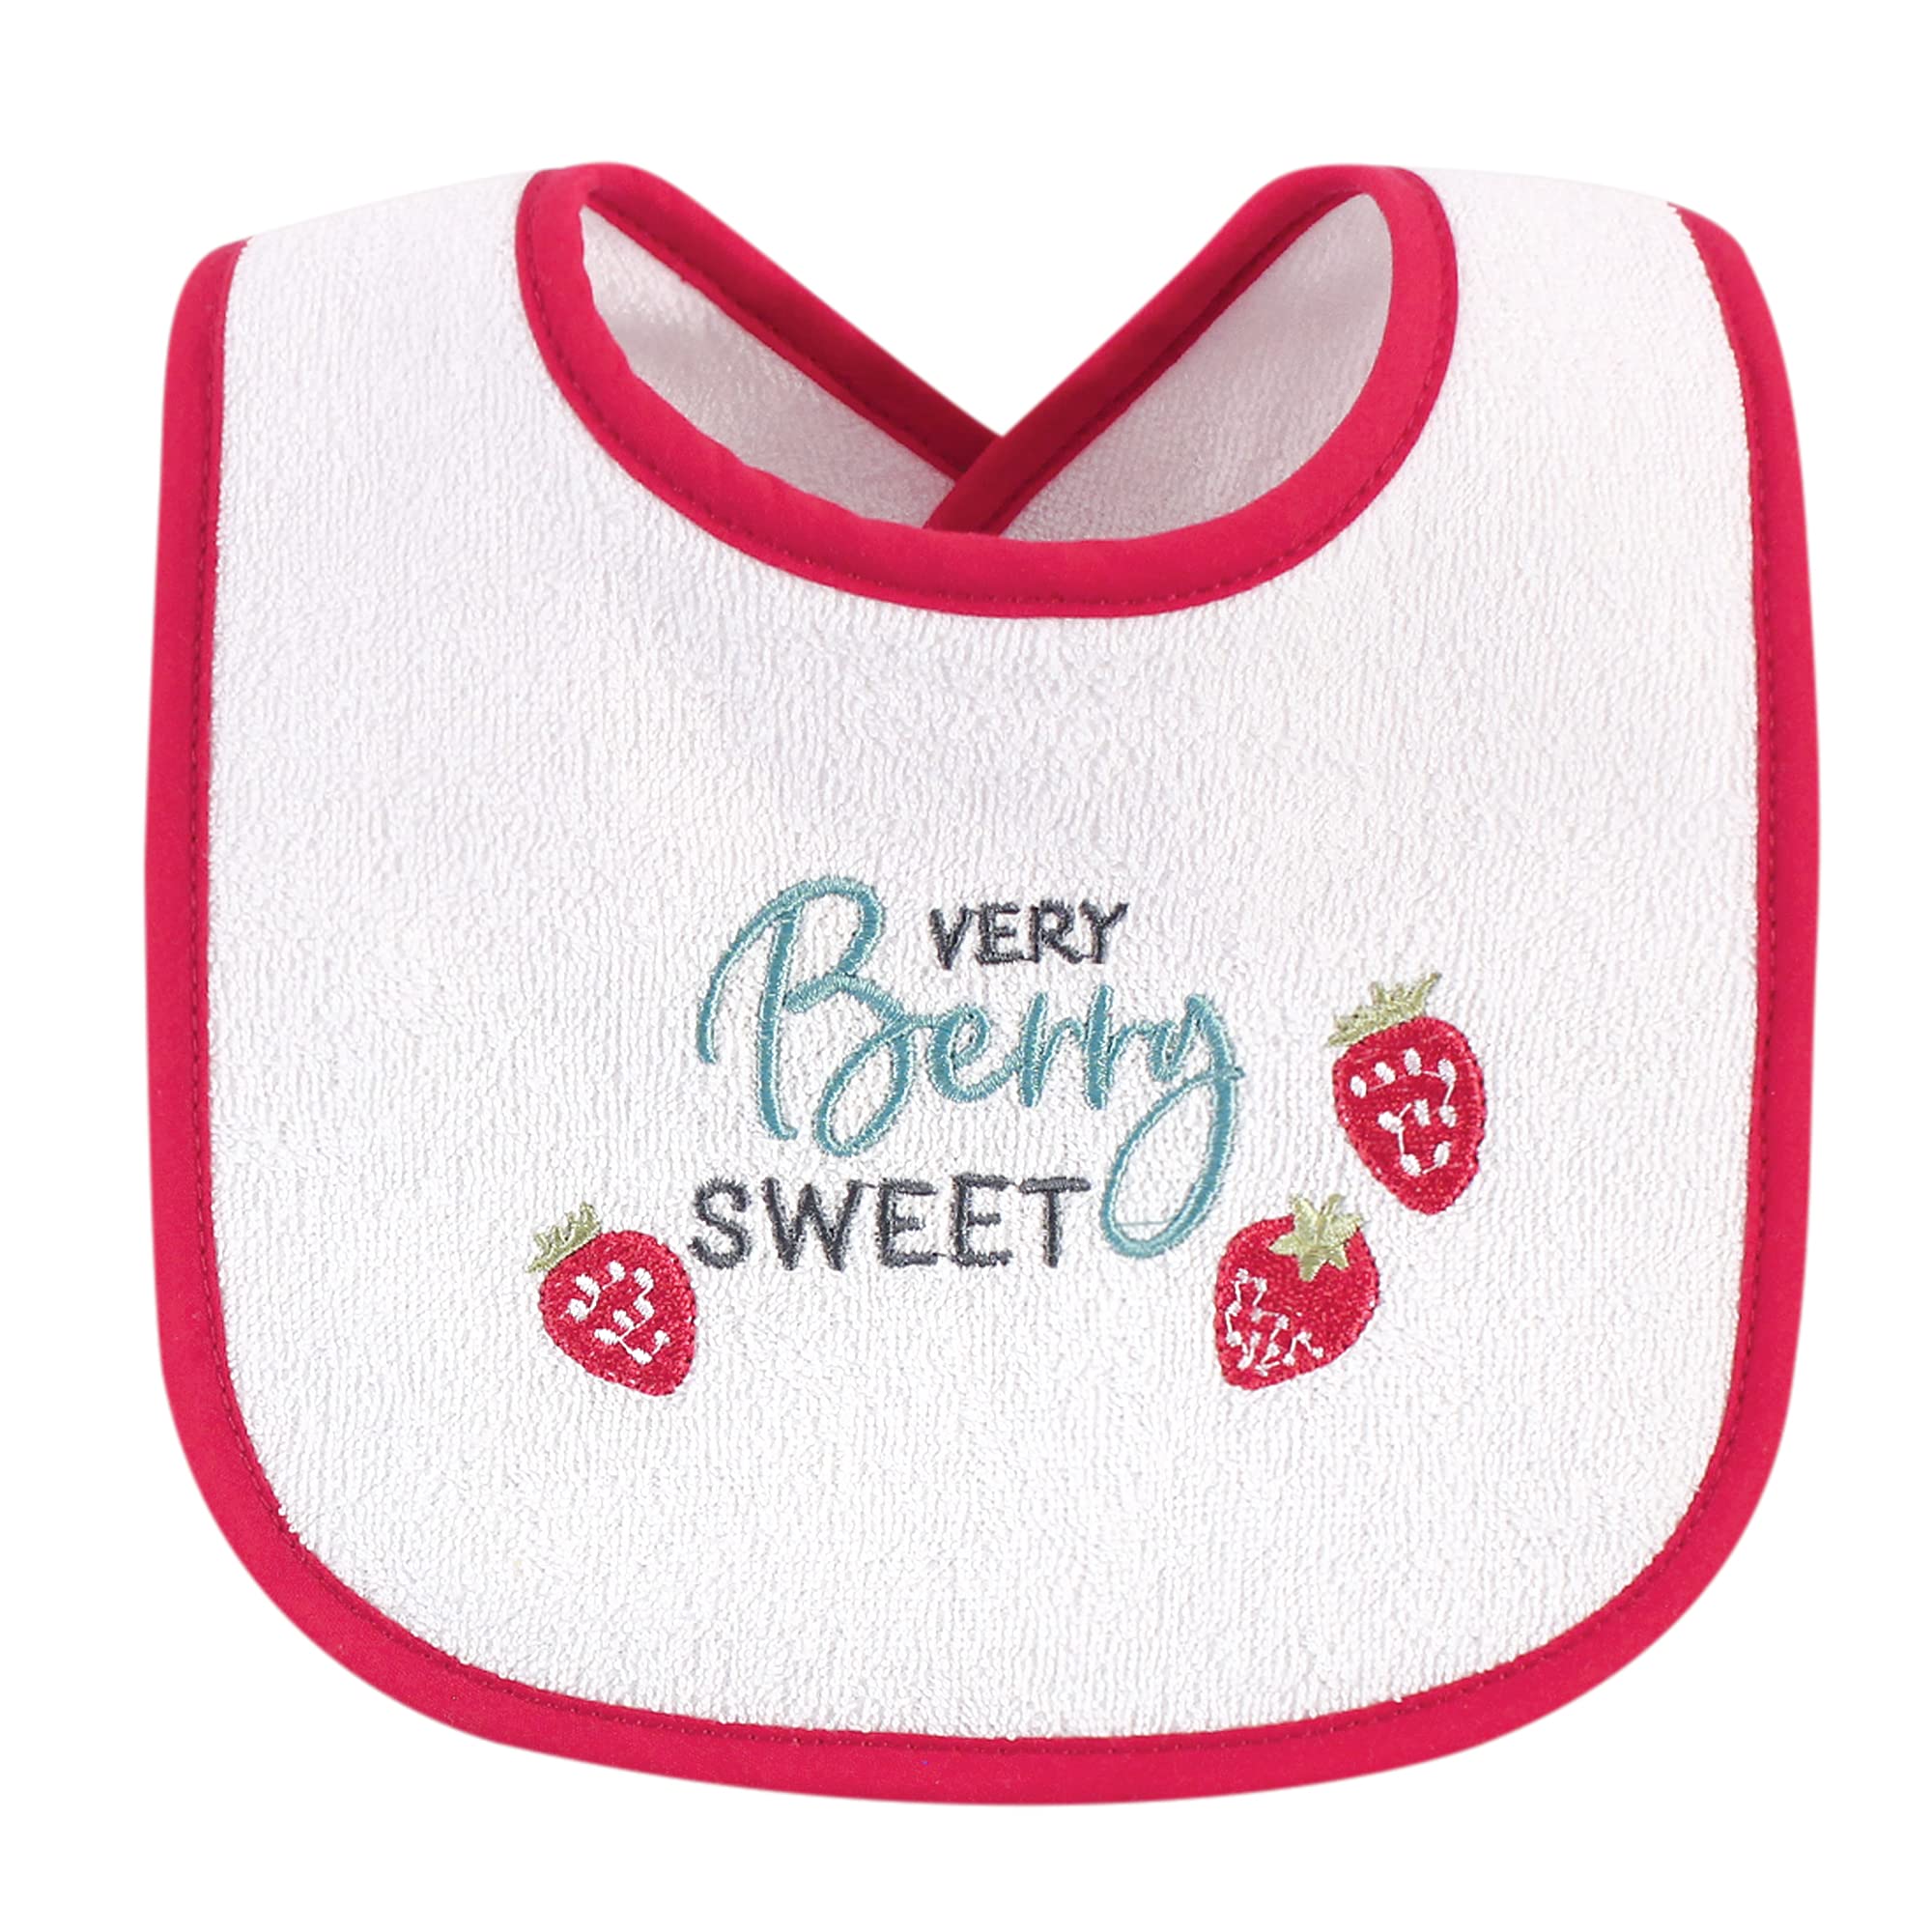 Hudson Baby Unisex Baby Cotton Terry Drooler Bibs With Fiber Filling